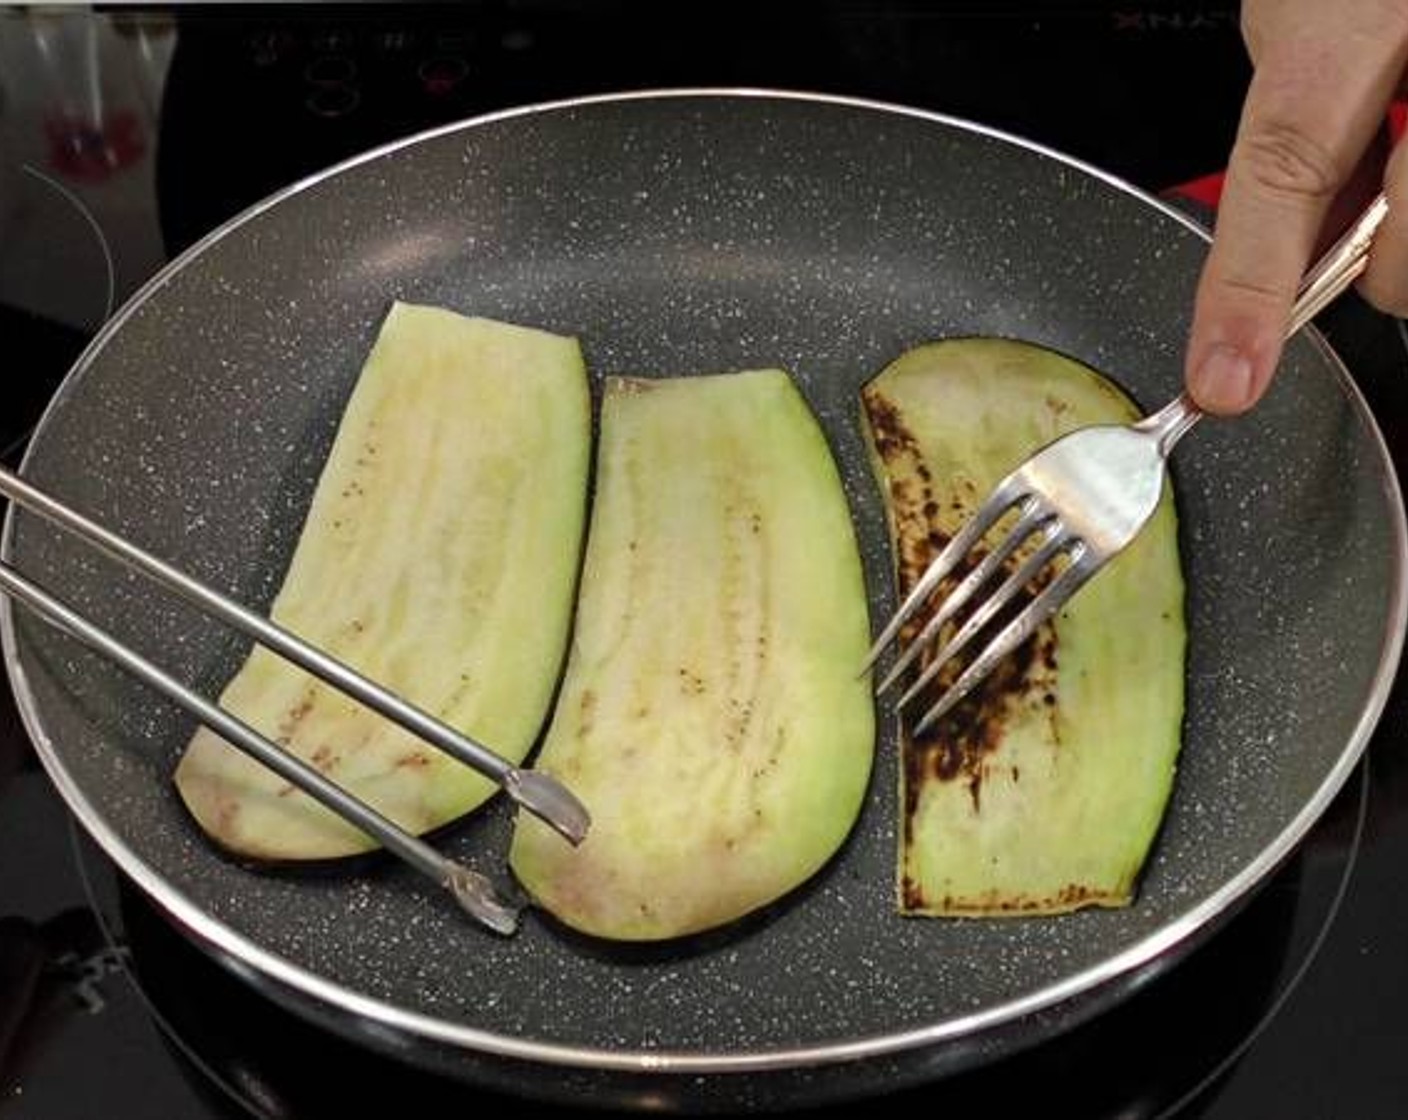 step 3 Use a paper towel to pat dry the excess moisture on the eggplant slices. Next, heat a little Olive Oil (as needed) in a pan and fry the eggplant slices.